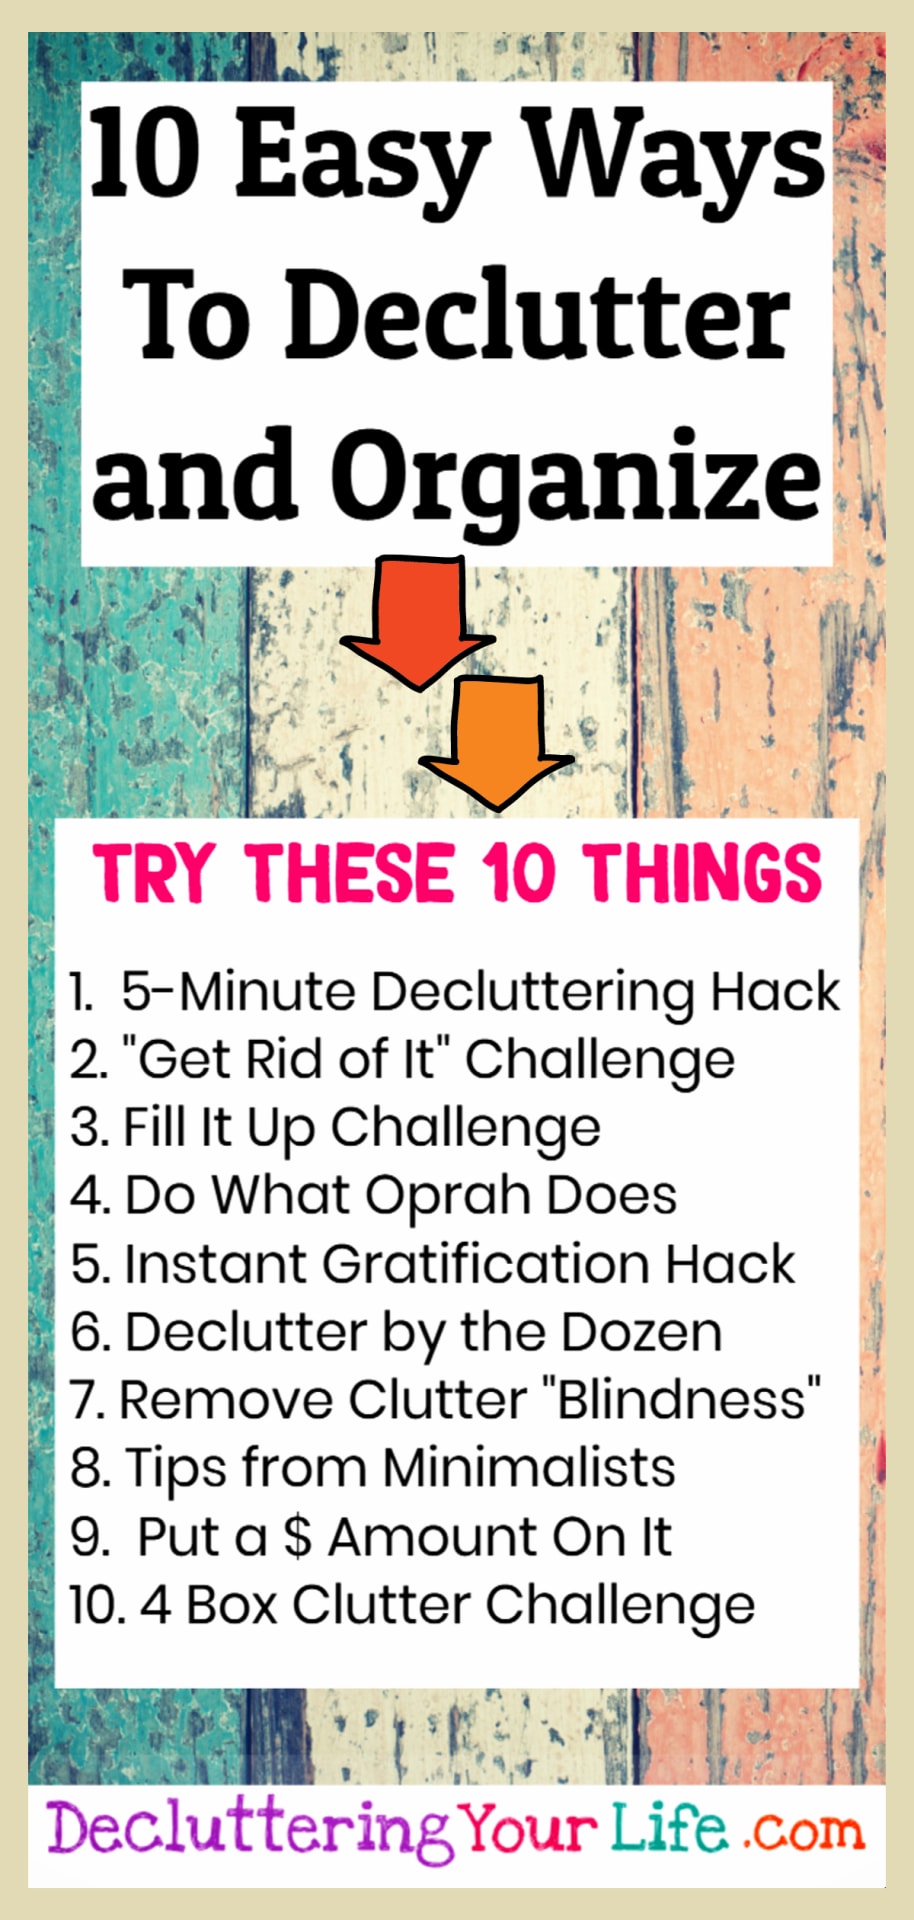 Organizing Ideas For The Home - Decluttering Ideas if you're feeling overwhelmed - where to start decluttering and organizing your messy house - decluttering step by step to declutter and organize without feeling overwhelmed